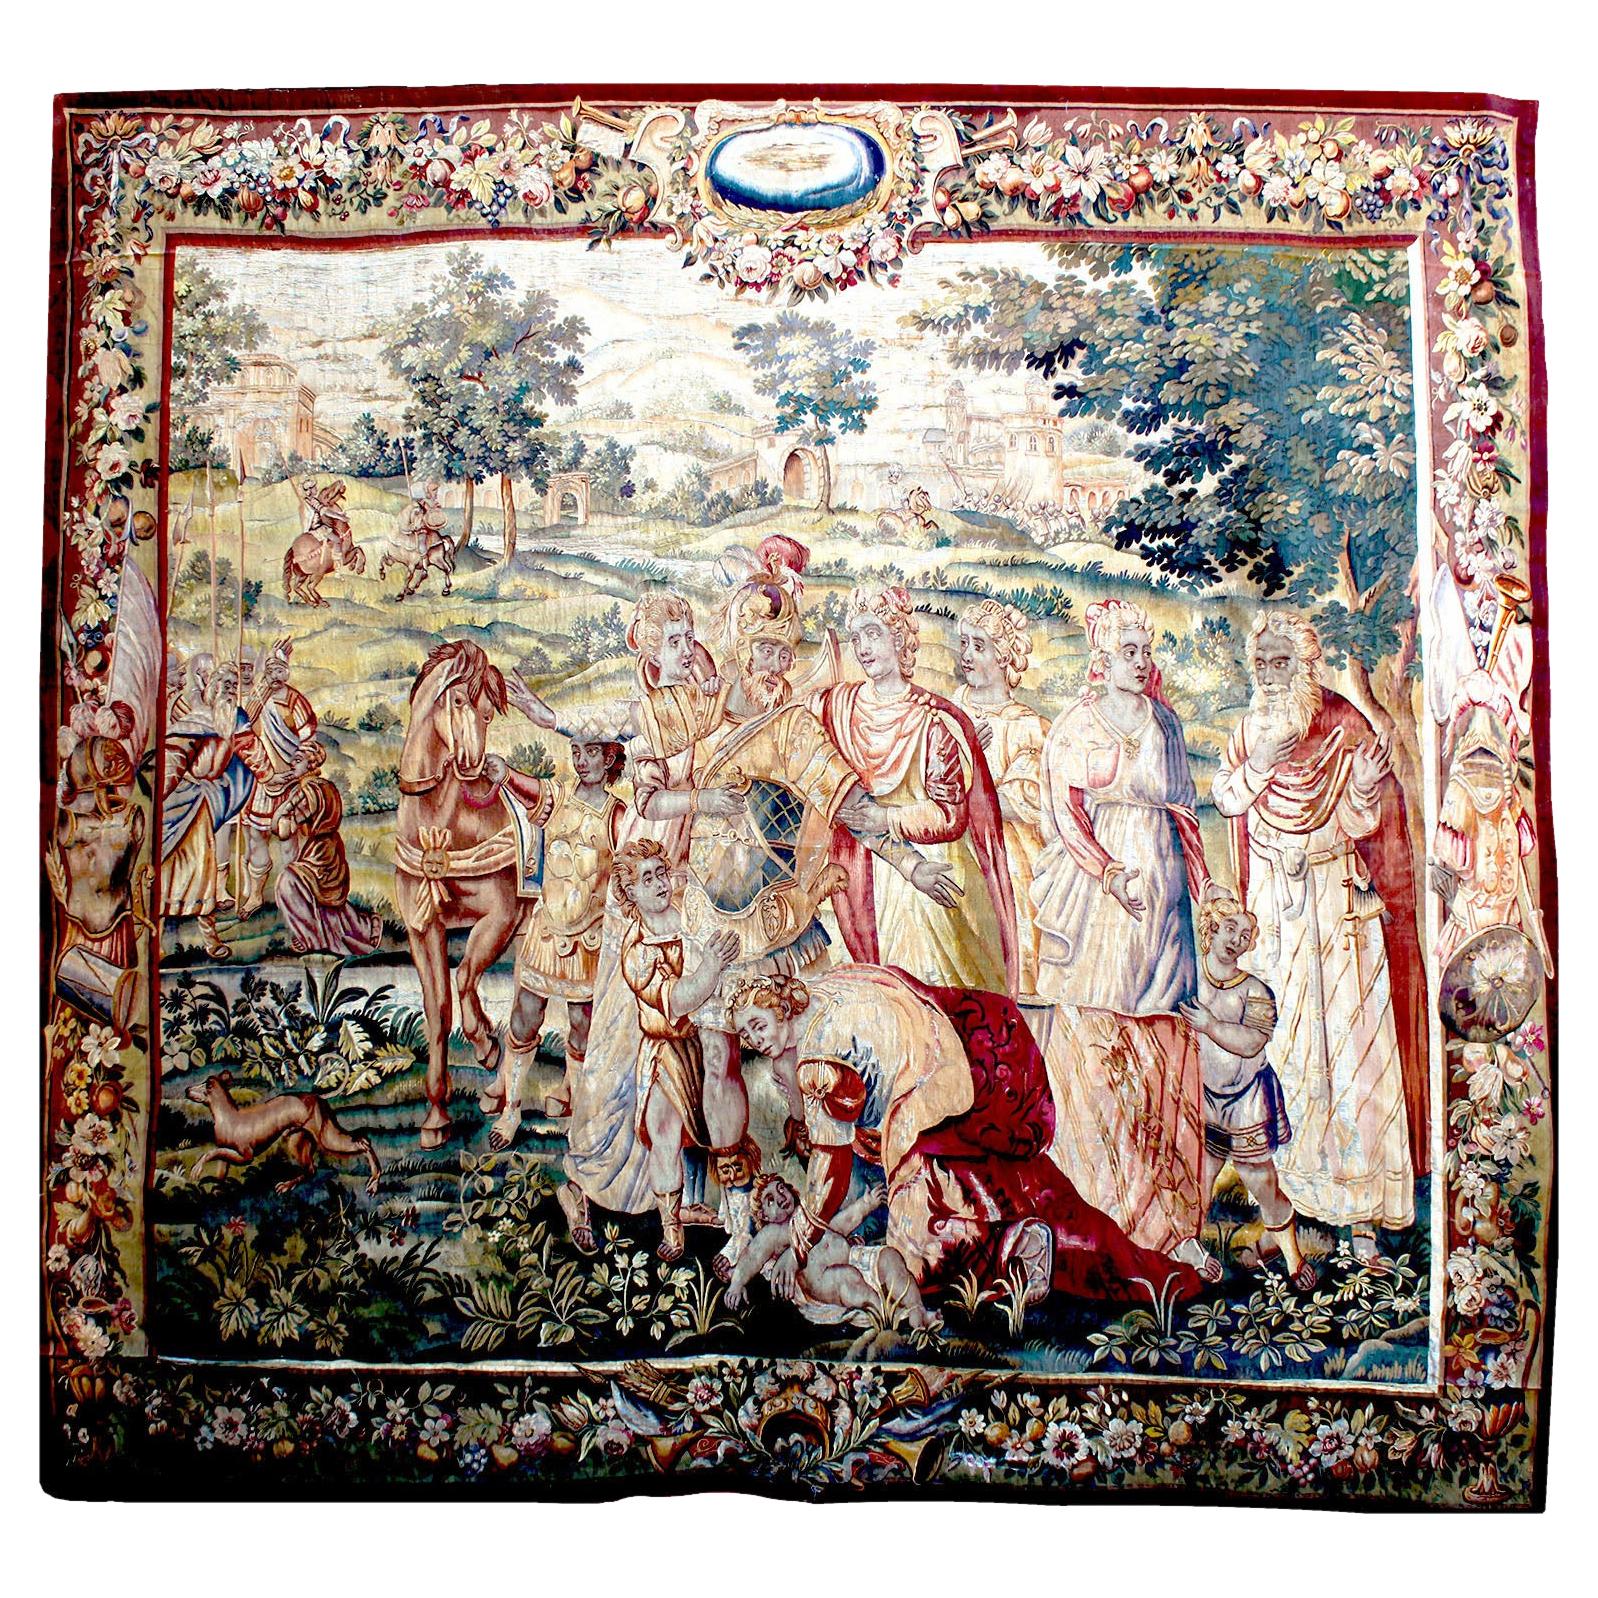 Flemish 17th-18th Century Baroque Historical Tapestry Fragment "A Royal Family"